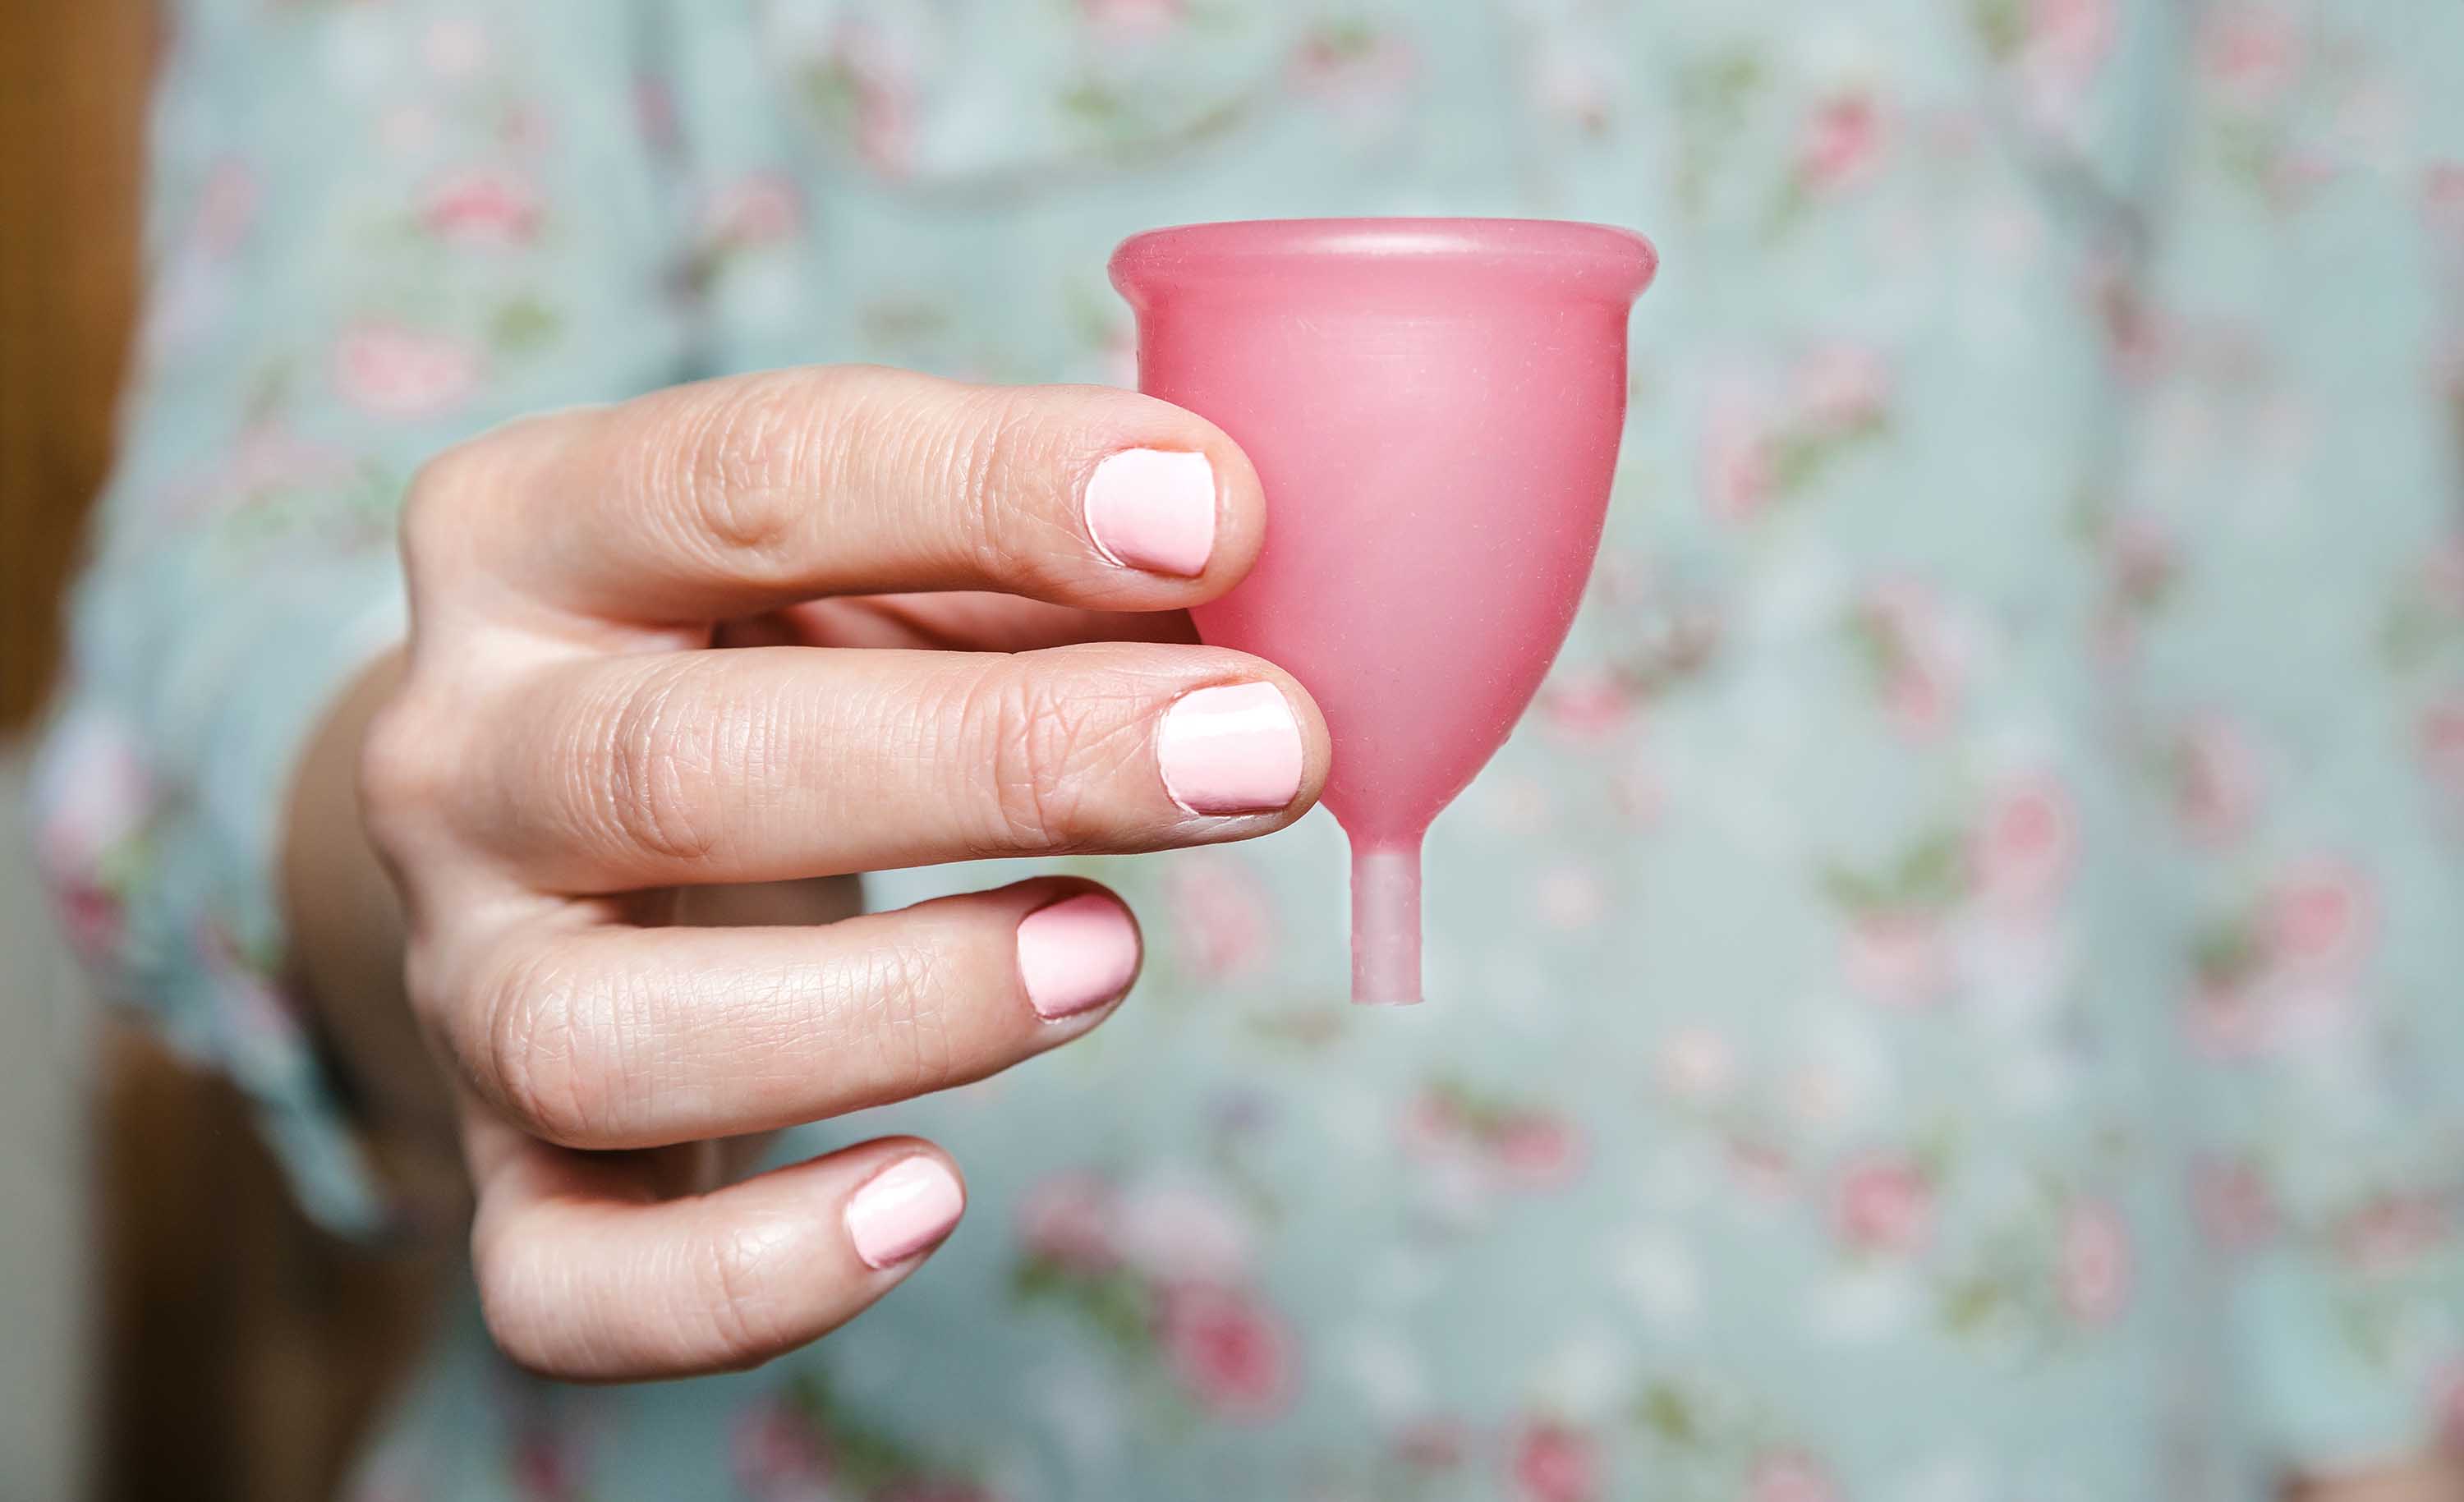 Menstrual where cups find to 5 Best